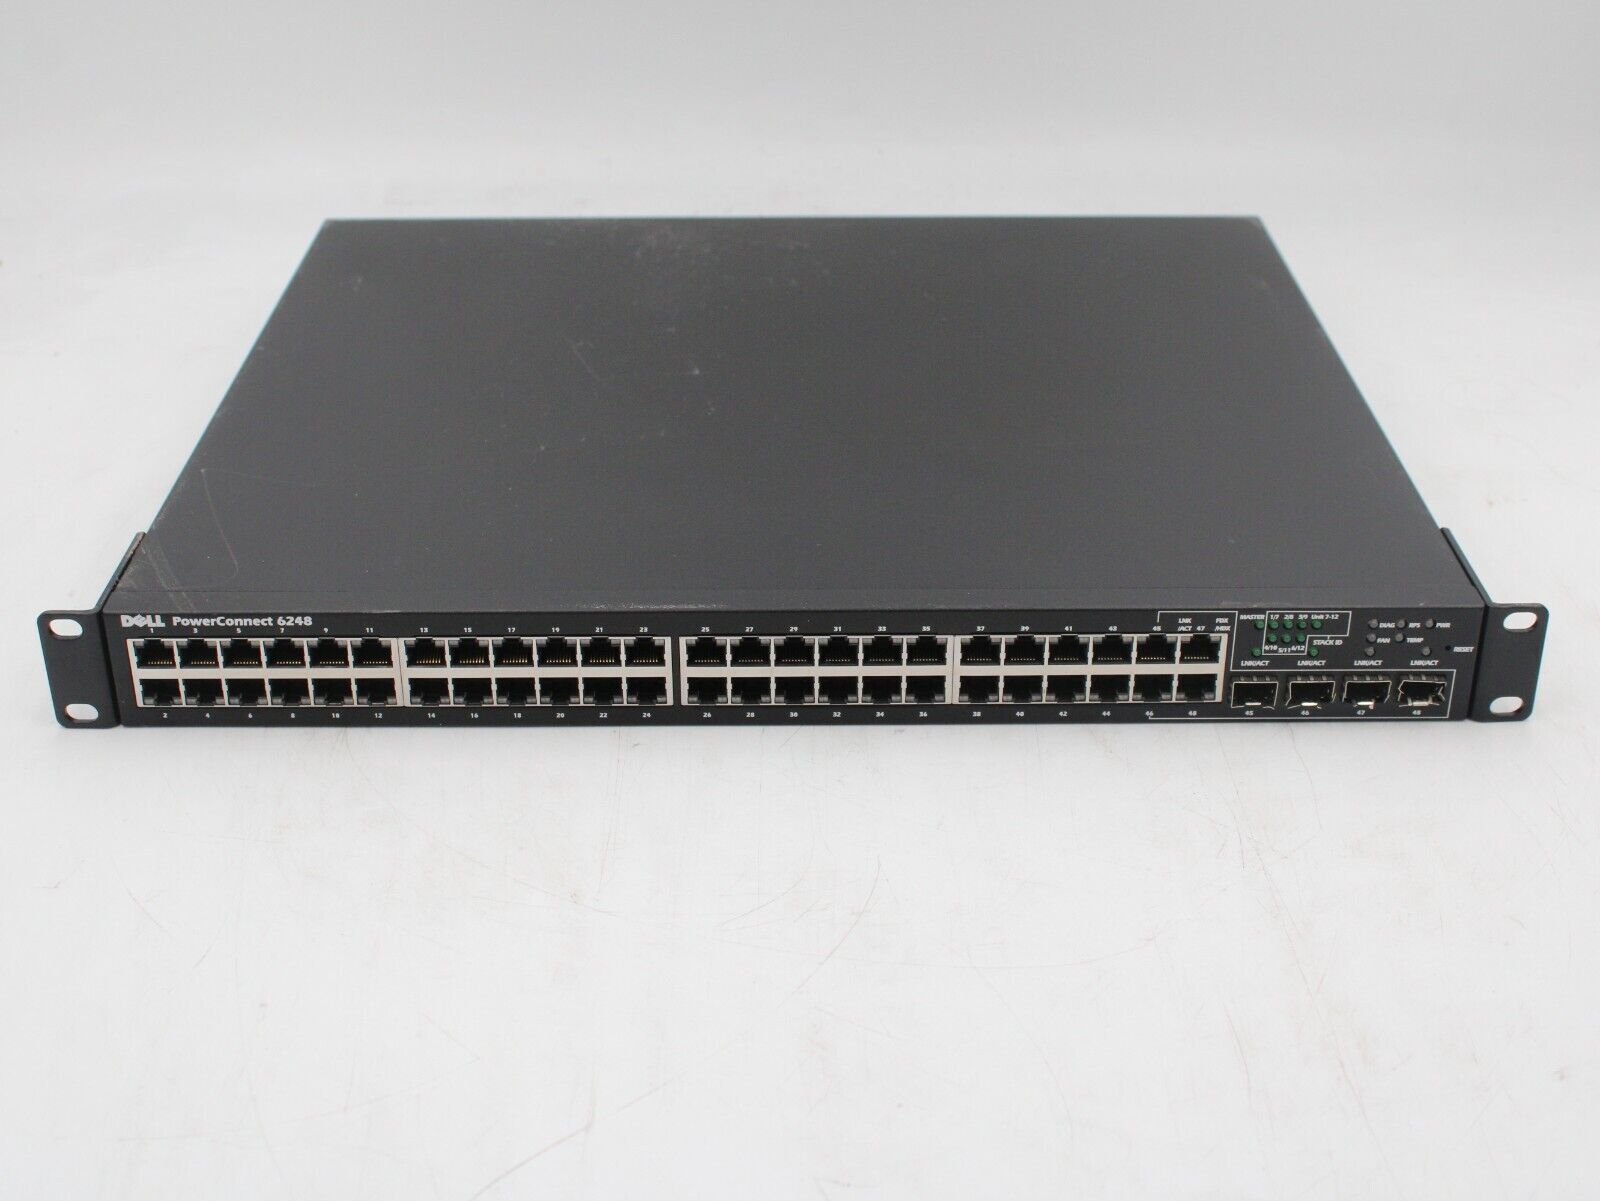 Dell PowerConnect 6248 48 Port Gigabit Ethernet Switch Managed 10/100/1000 